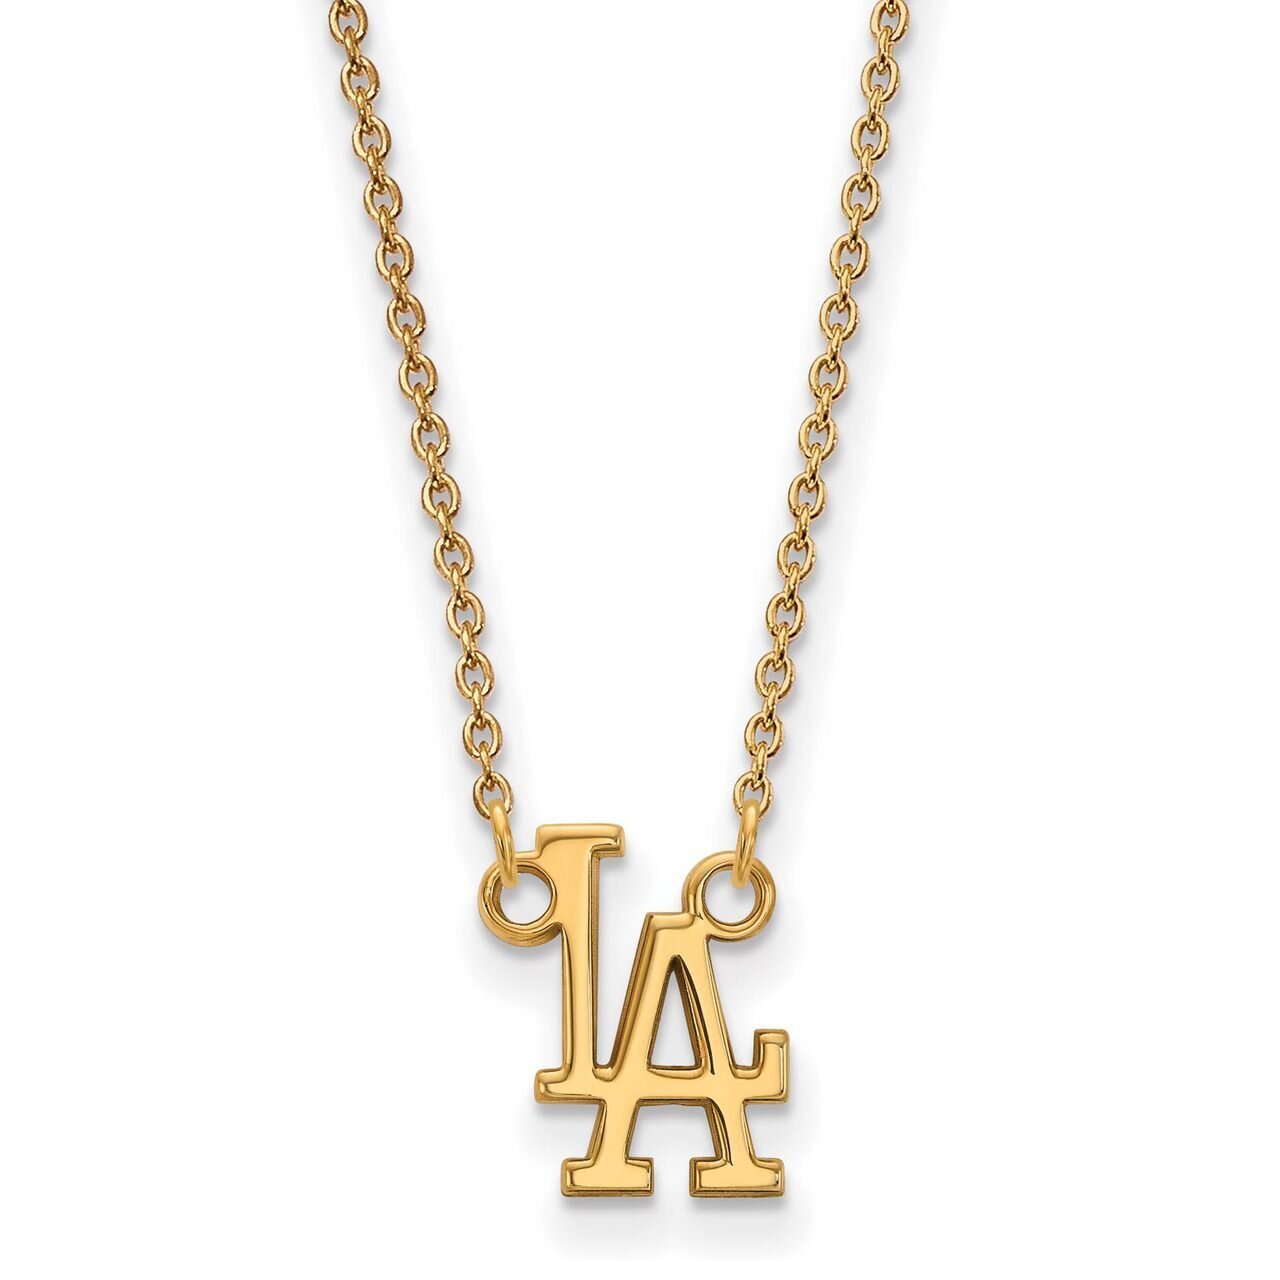 Los Angeles Dodgers Small Pendant with Chain Necklace 10k Yellow Gold 1Y008DOD-18